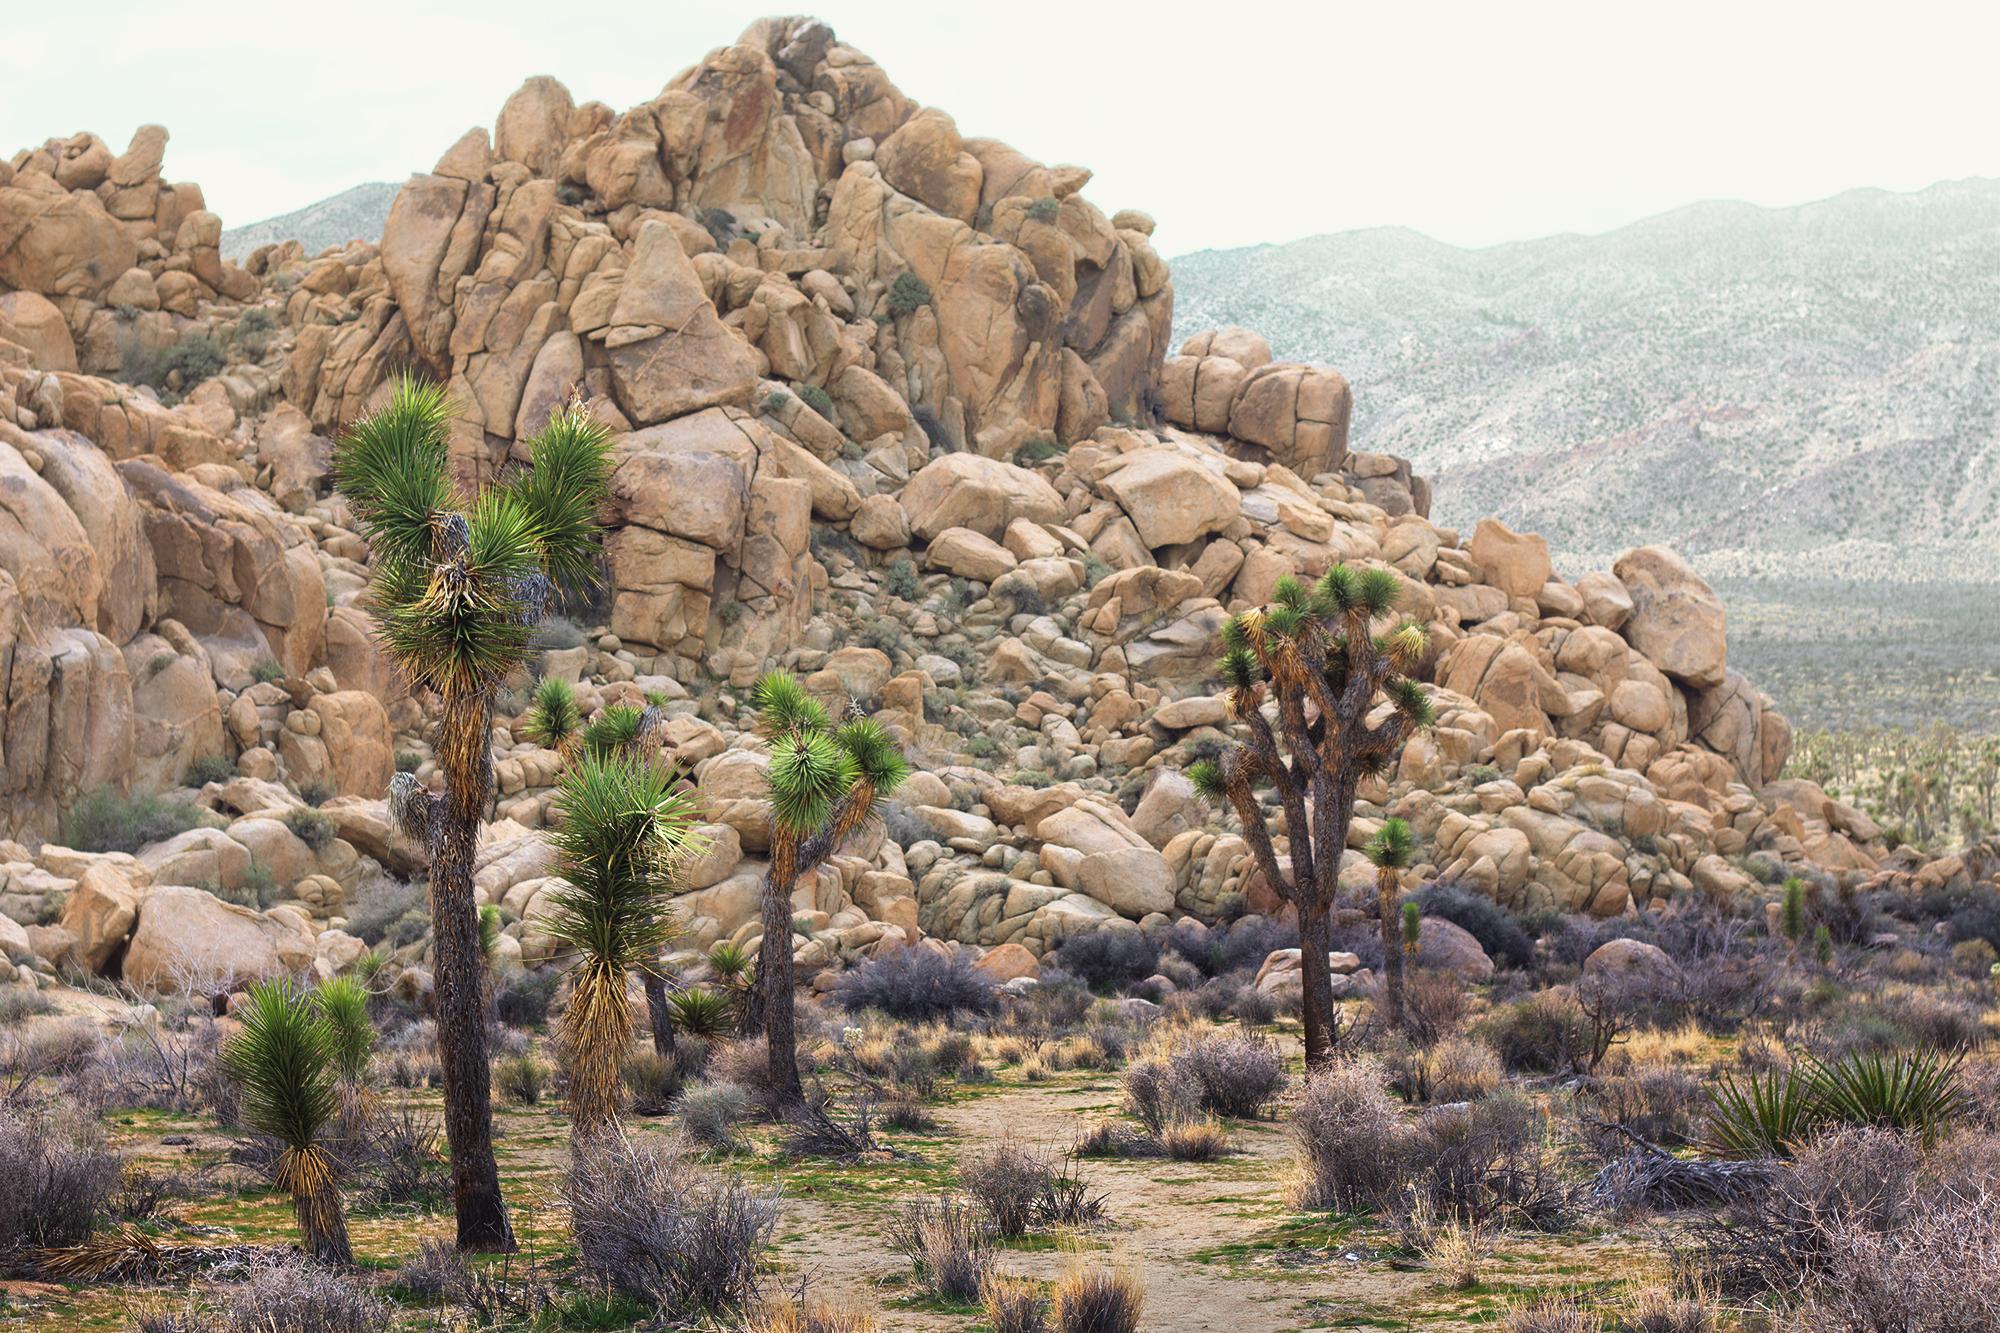 A desert landscape to hang above your couch
This framed fine art photograph shows a beautiful scene from the Joshua Tree desert landscape with its distinctive Joshua Trees and impressive rock formations that made the Joshua Tree National park one of